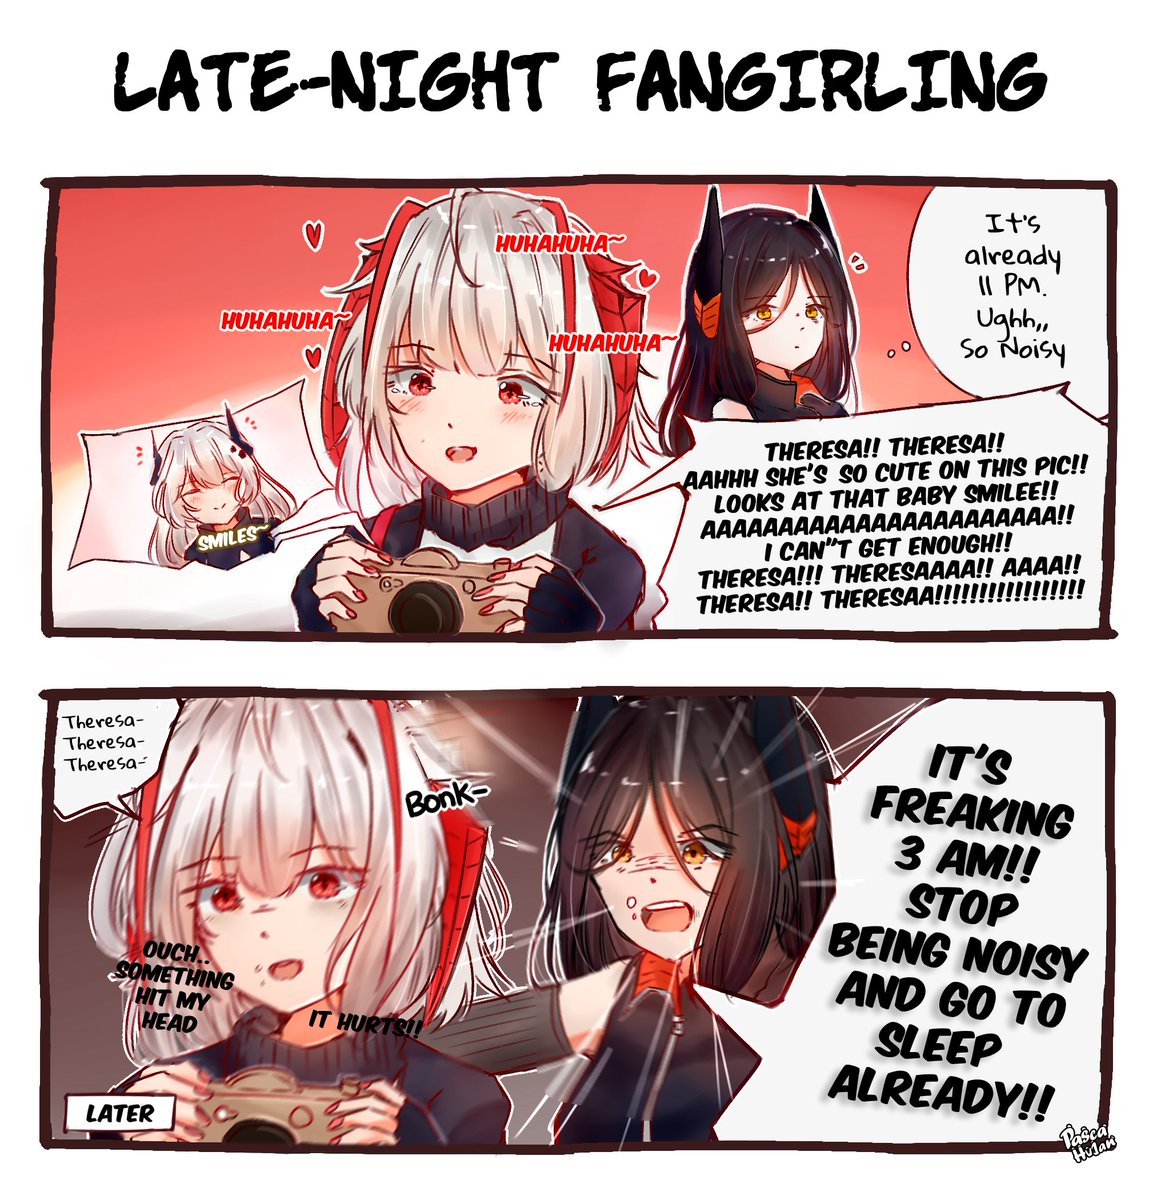 Late-night Fangirling
---
#明日方舟 #アークナイツ #명일방주 #Arknights 

//I don't expect to draw W this cute!!
Look at that face!! so innocent~ 